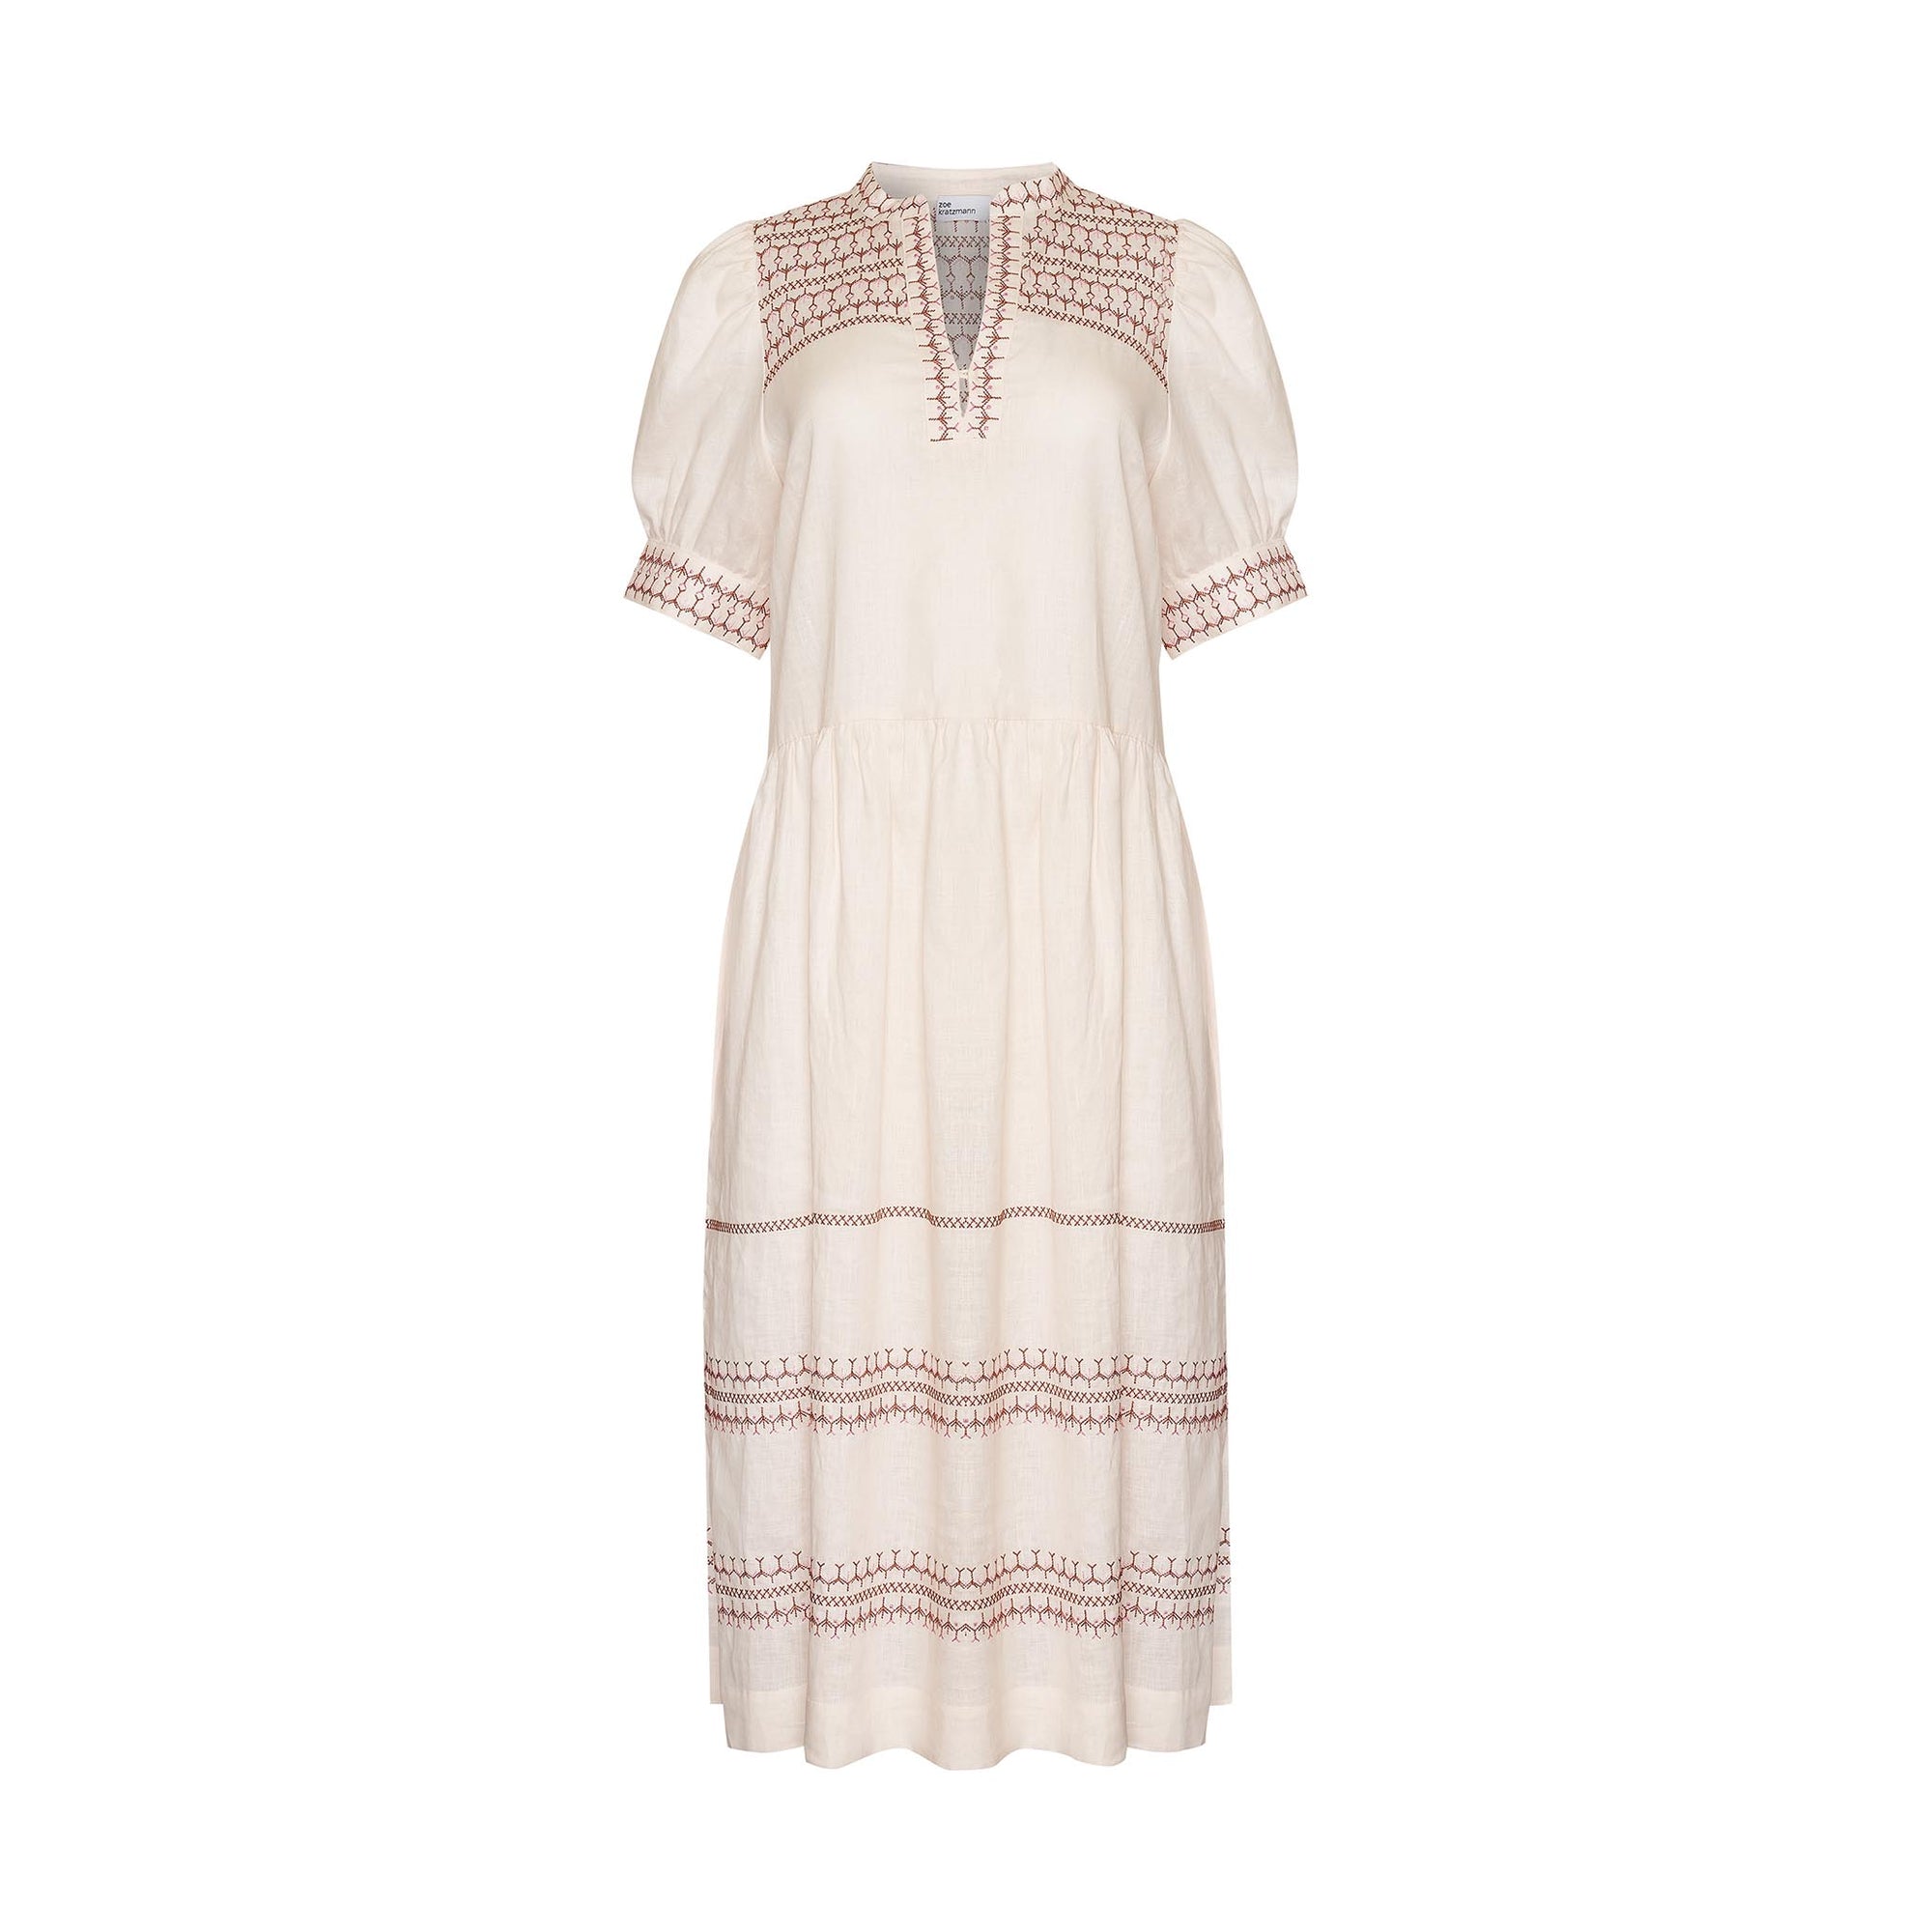 cream, embroidered, midi dress, mid-length sleeve, rounded neckline, side pockets, drop waist, side splits, product image